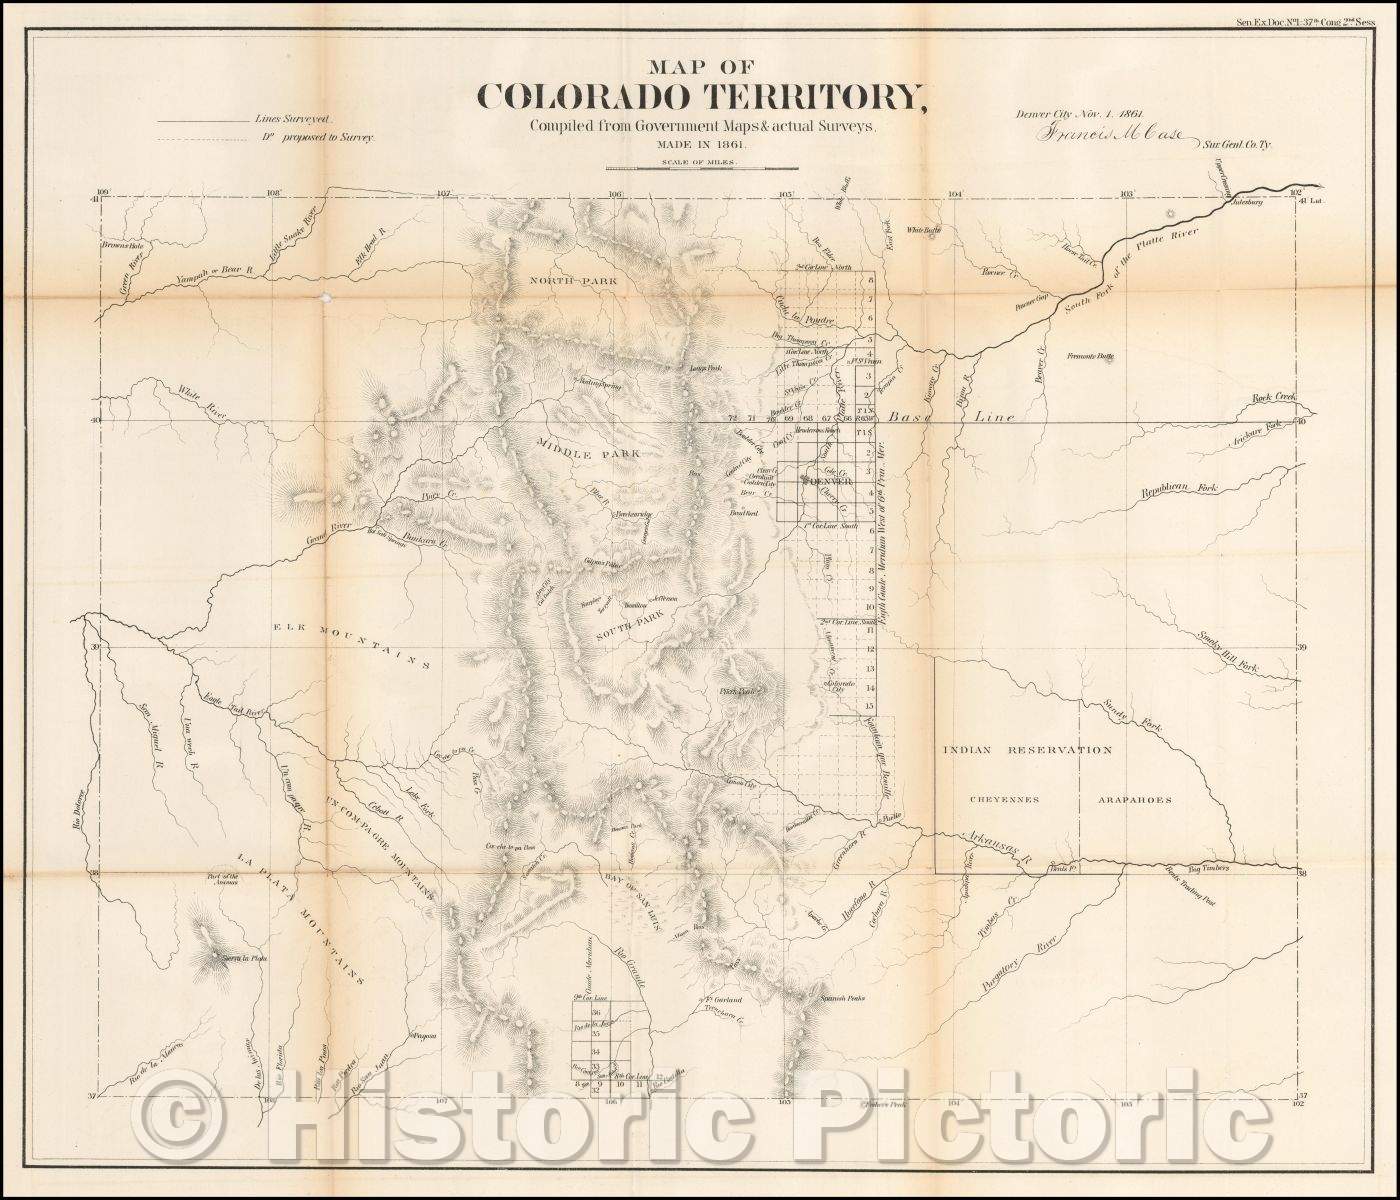 Historic Map - Map of Colorado Territory, 1861, General Land Office v2